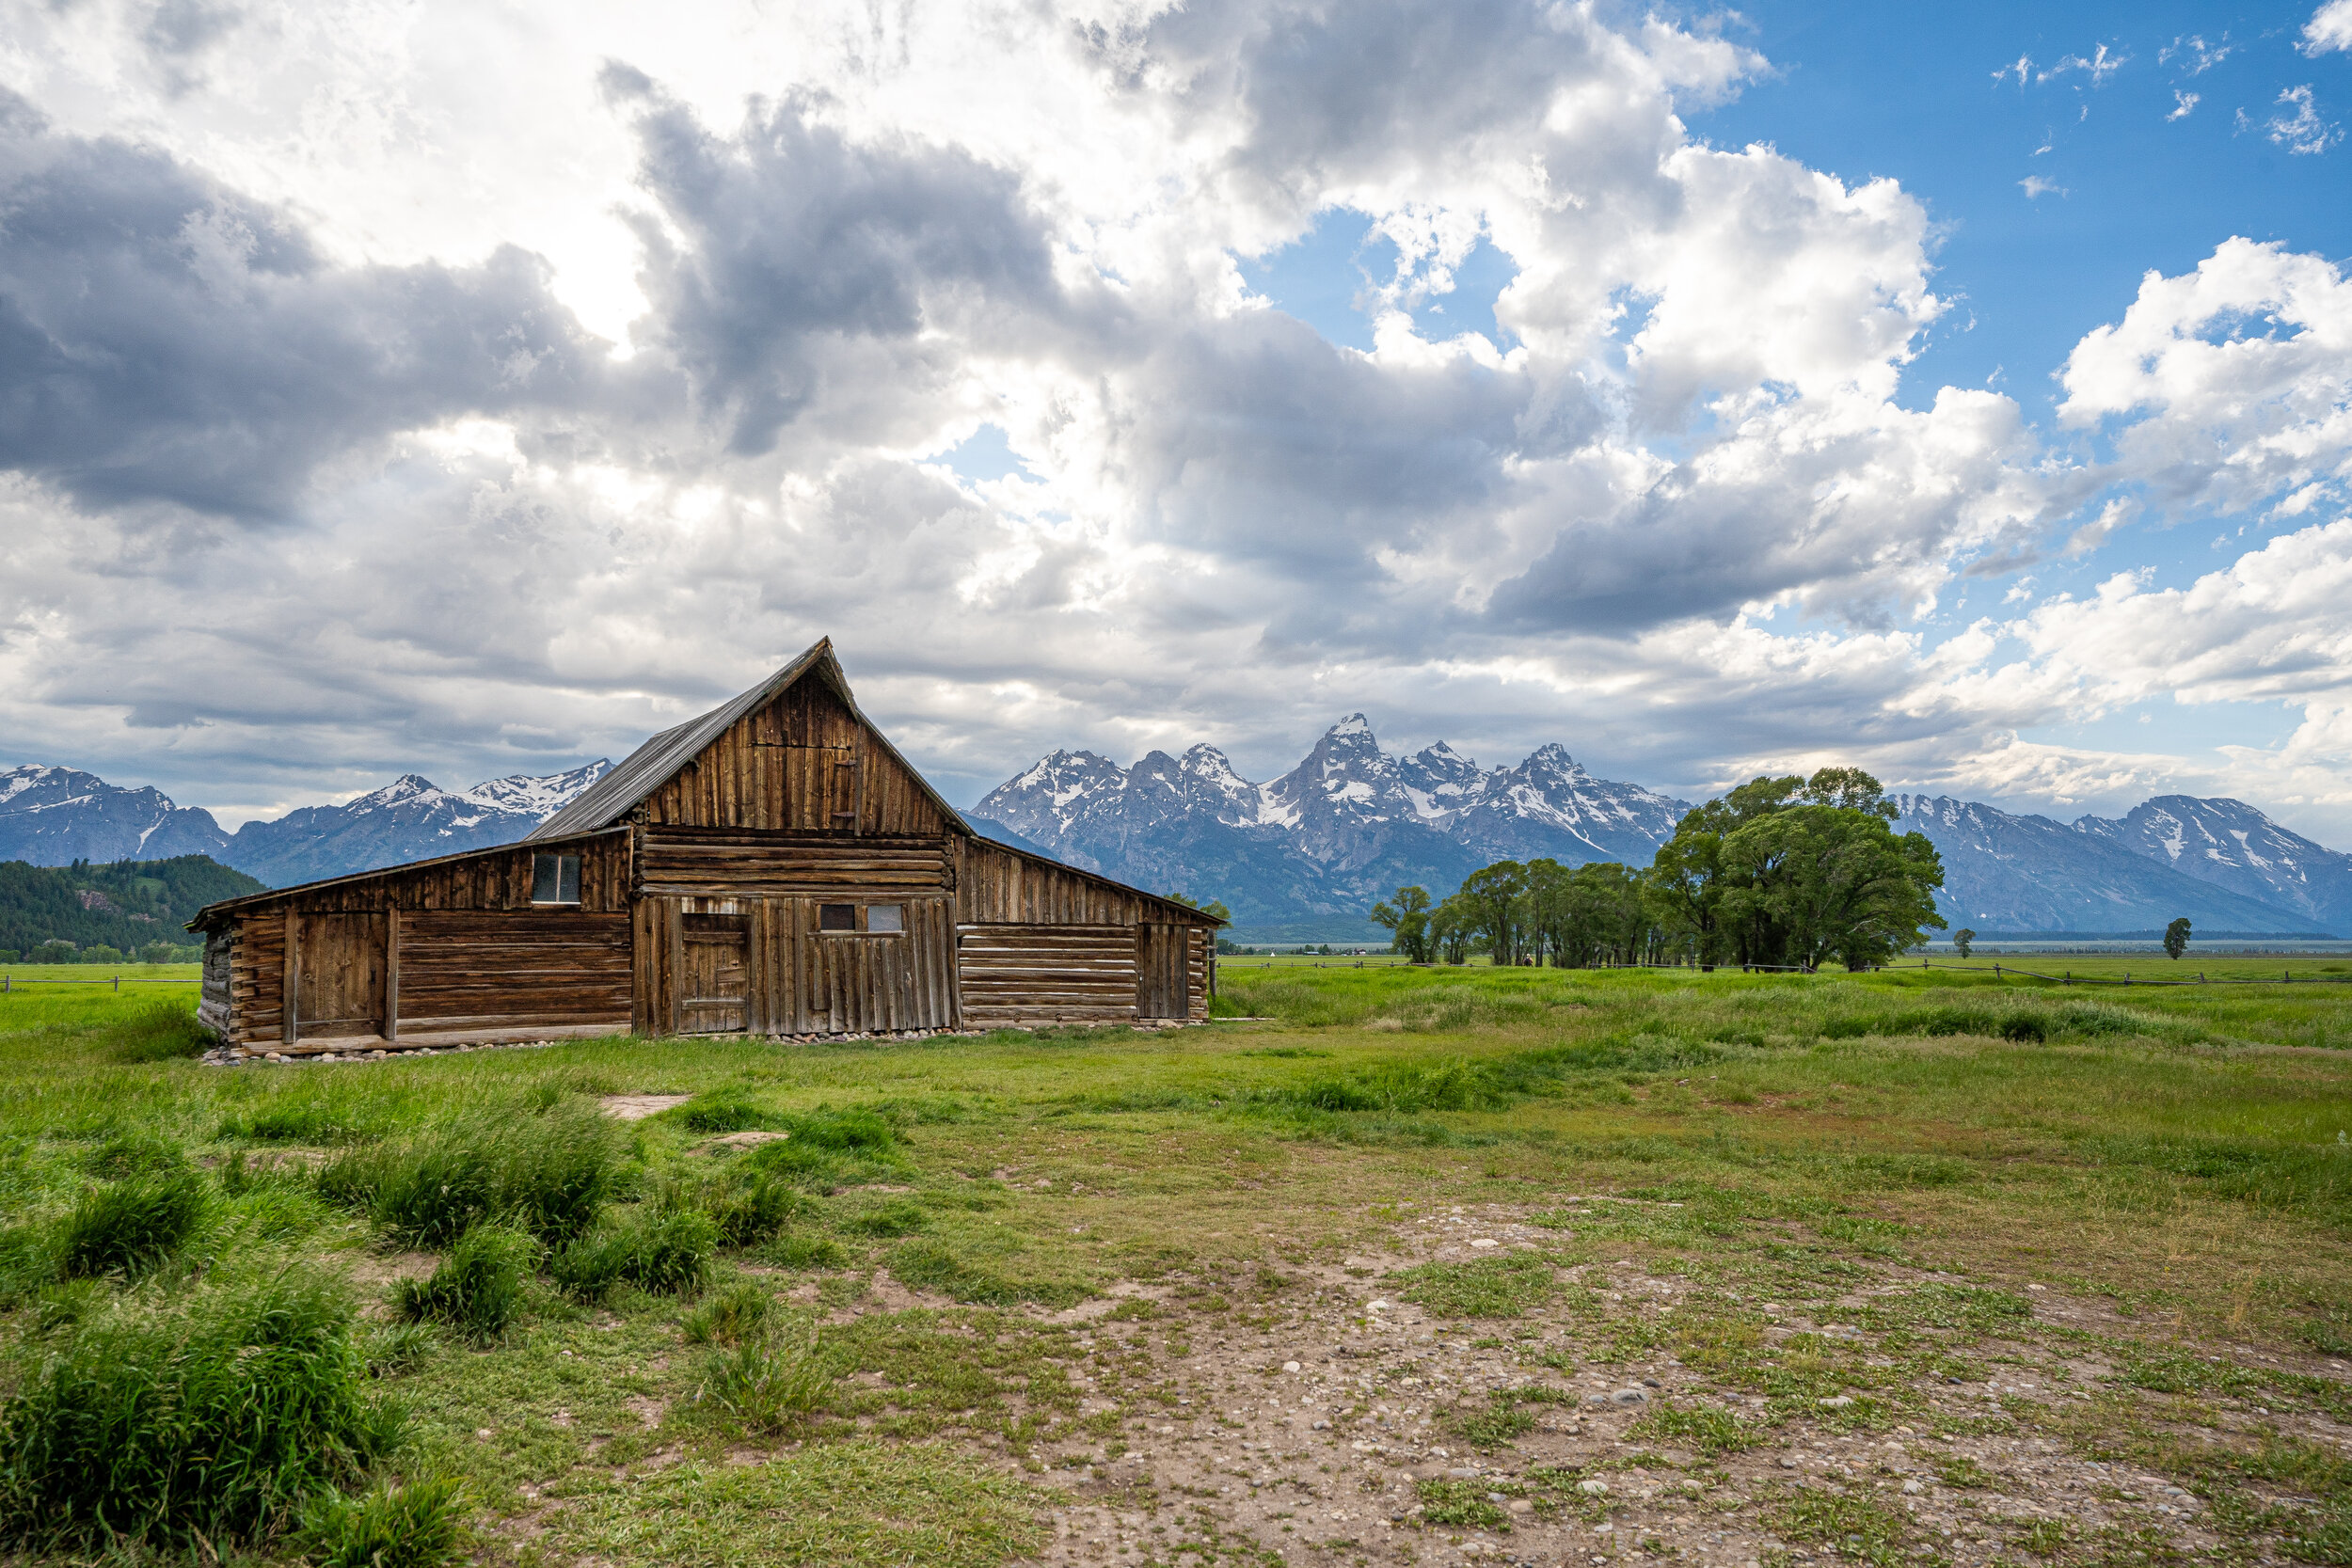  The most well-known of all the structures on Mormon Row is the famous T.A. Moulton Barn. You’ve probably seen a framed photograph or painting or completed a 1000-piece puzzle of this famous barn with the Teton Range in the background.  